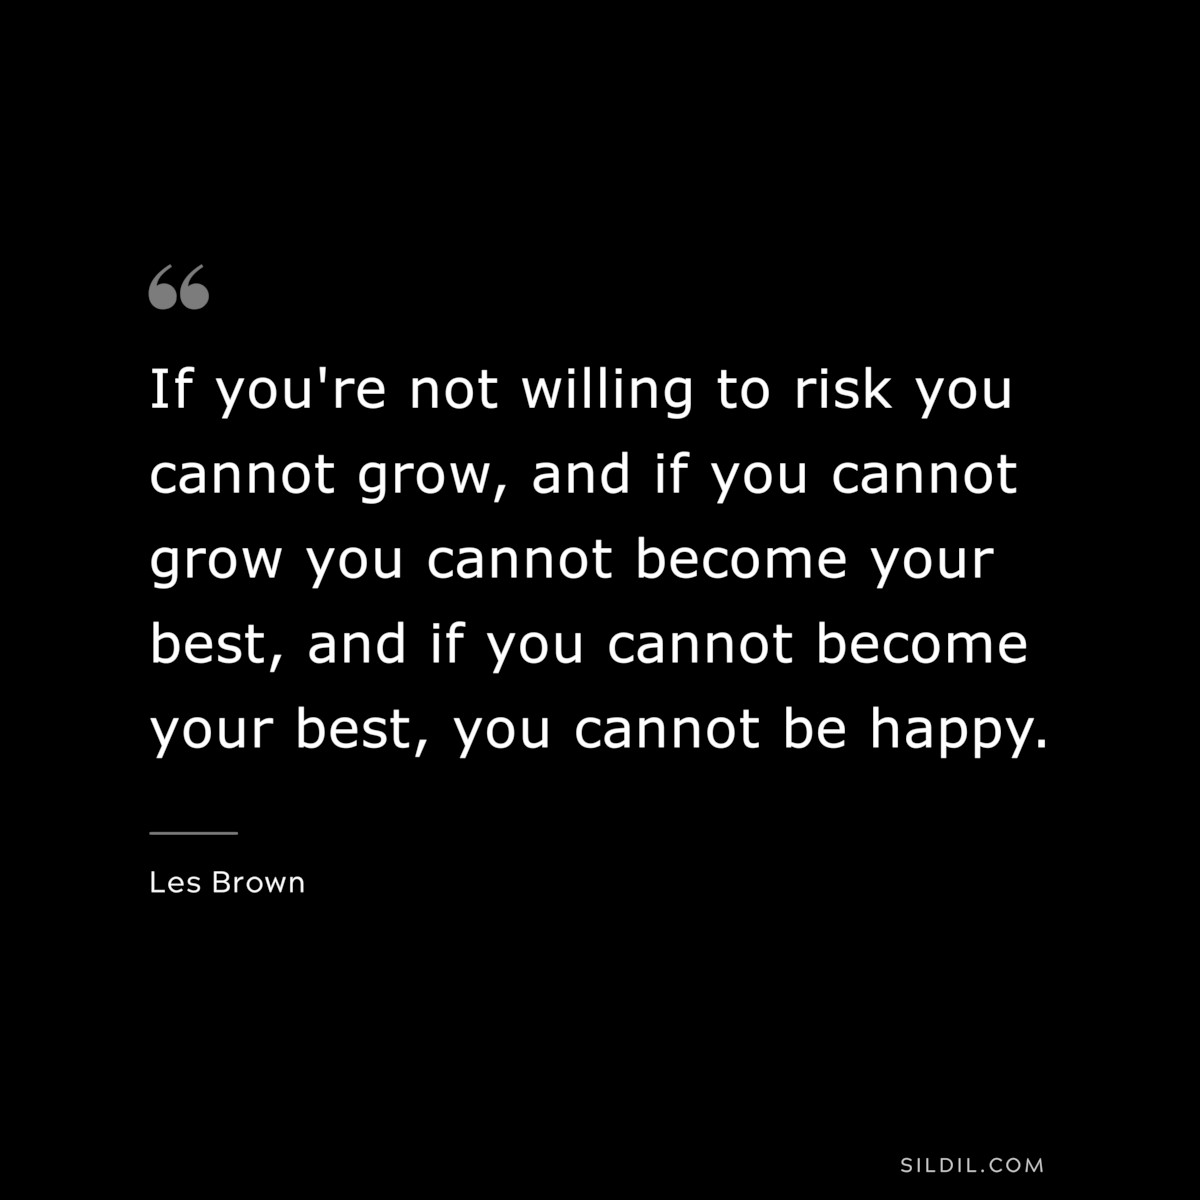 If you're not willing to risk you cannot grow, and if you cannot grow you cannot become your best, and if you cannot become your best, you cannot be happy. ― Les Brown